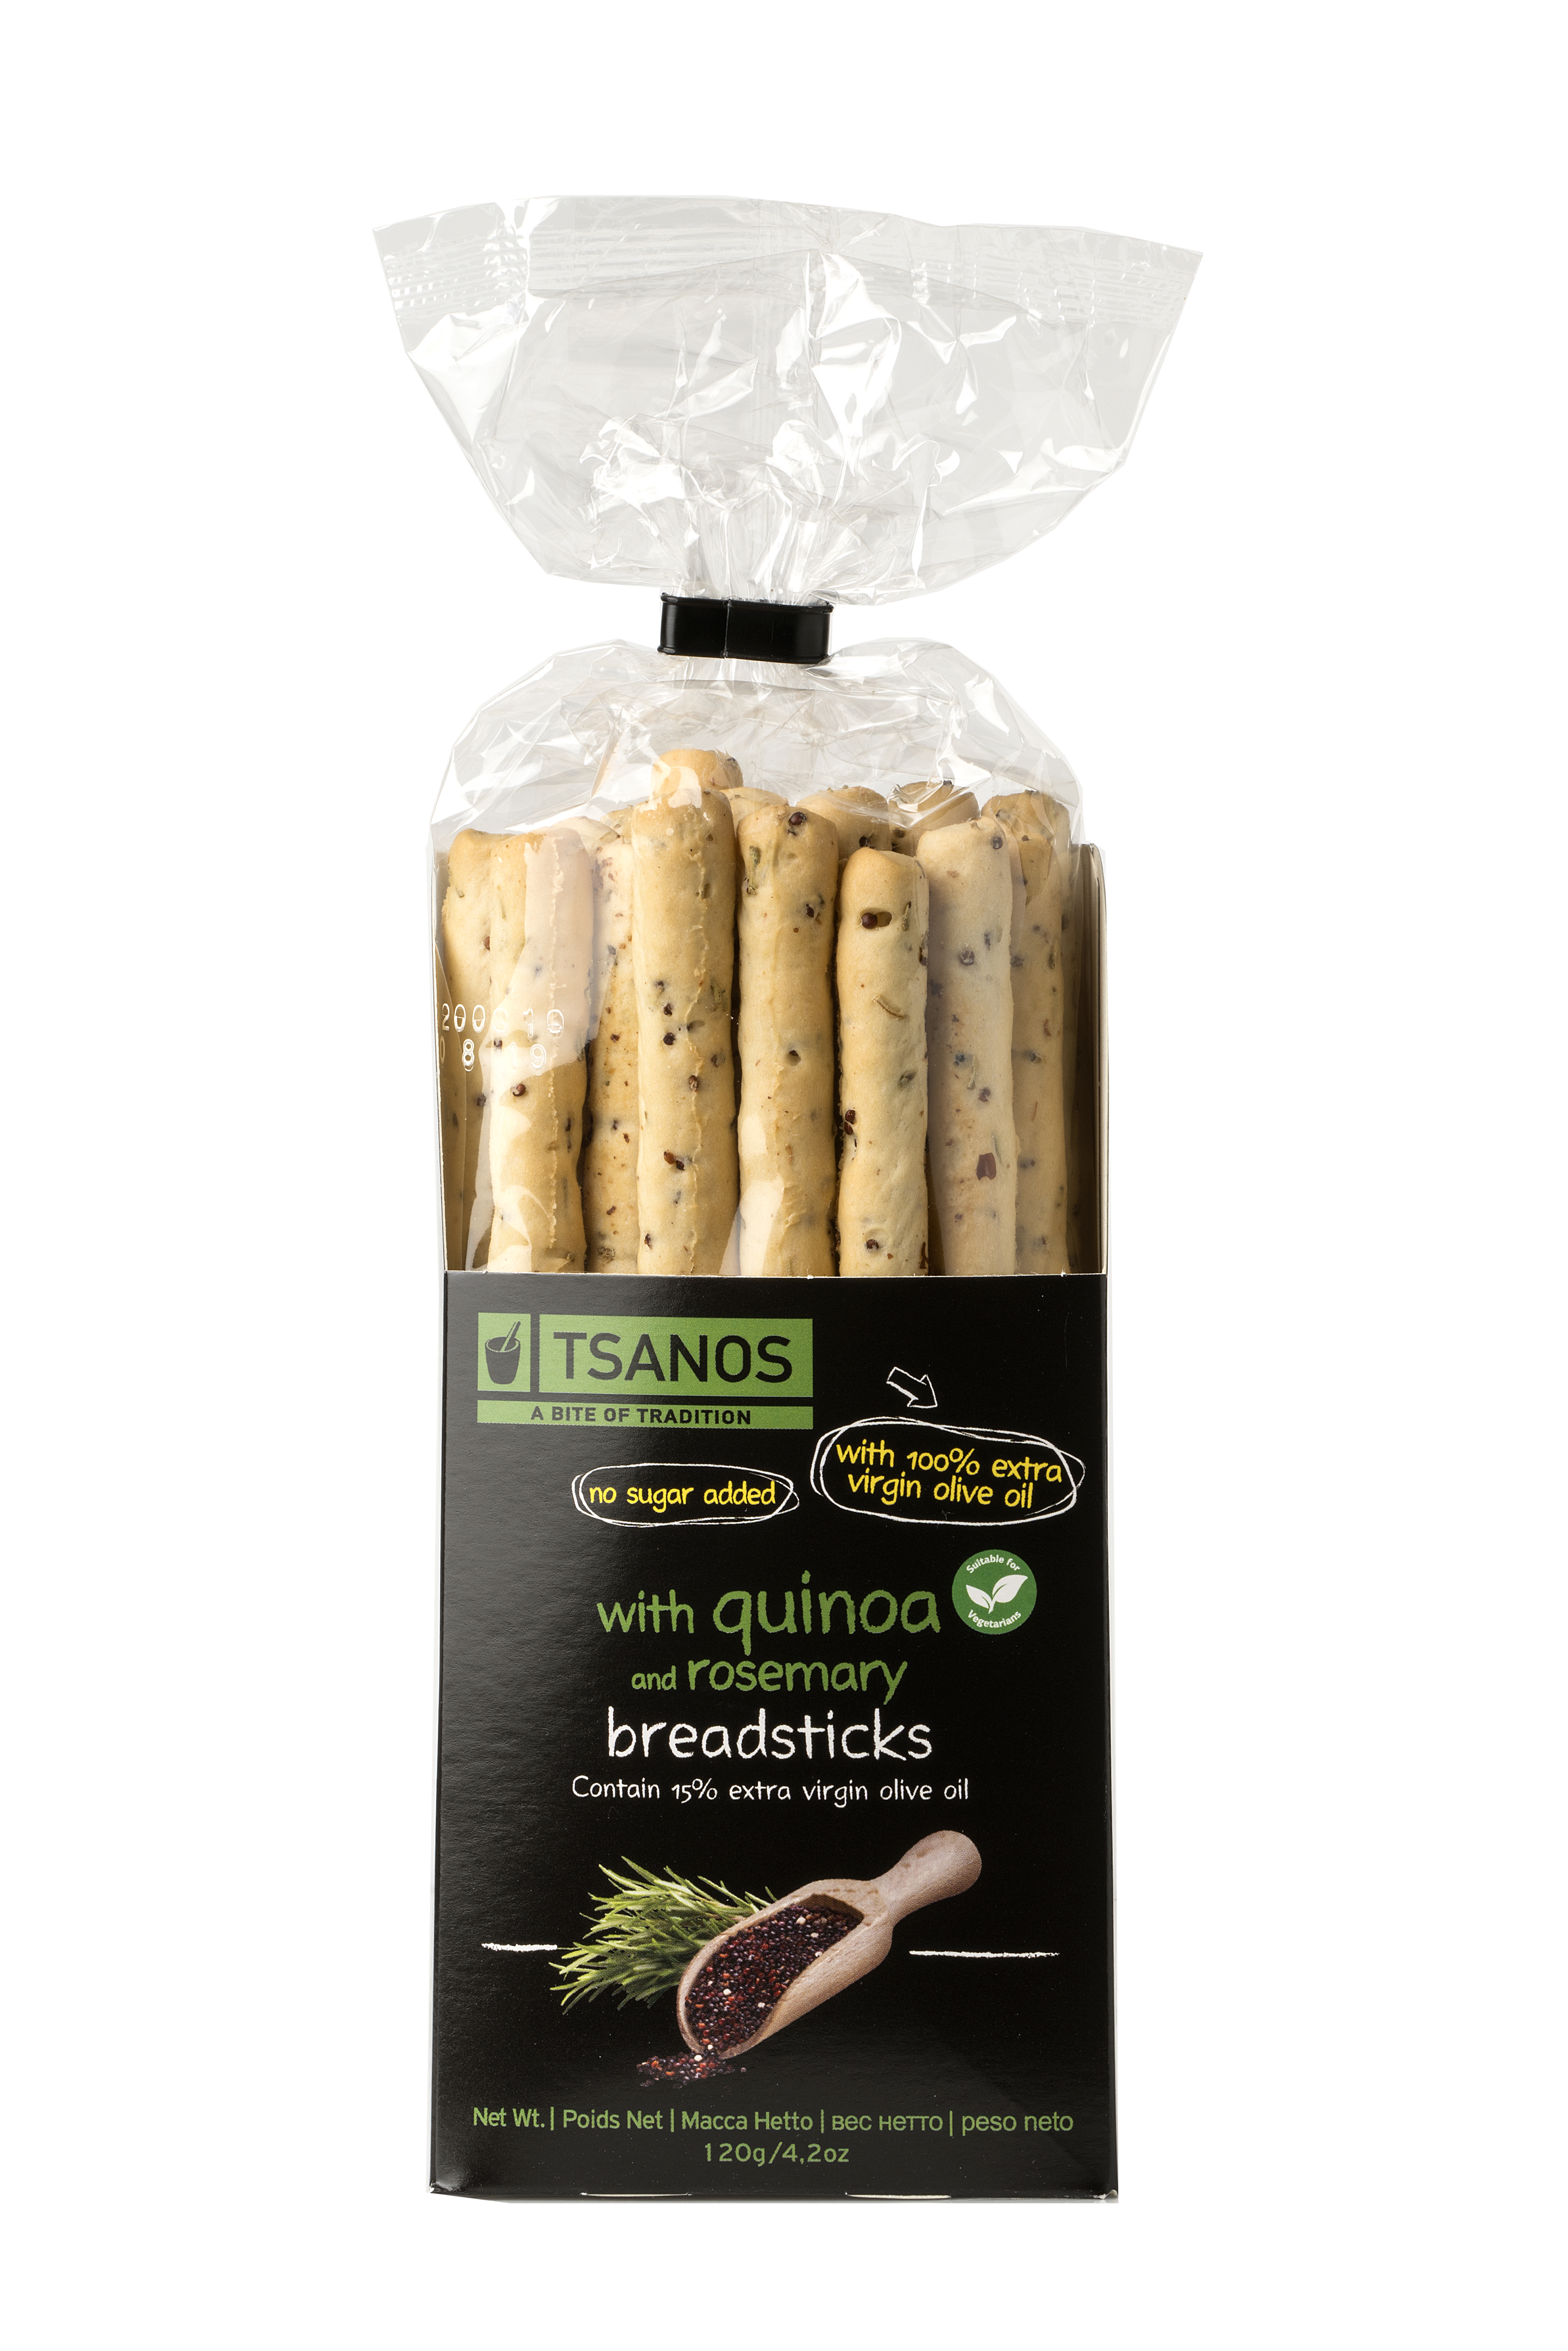 Breadsticks with quinoa and rosemary